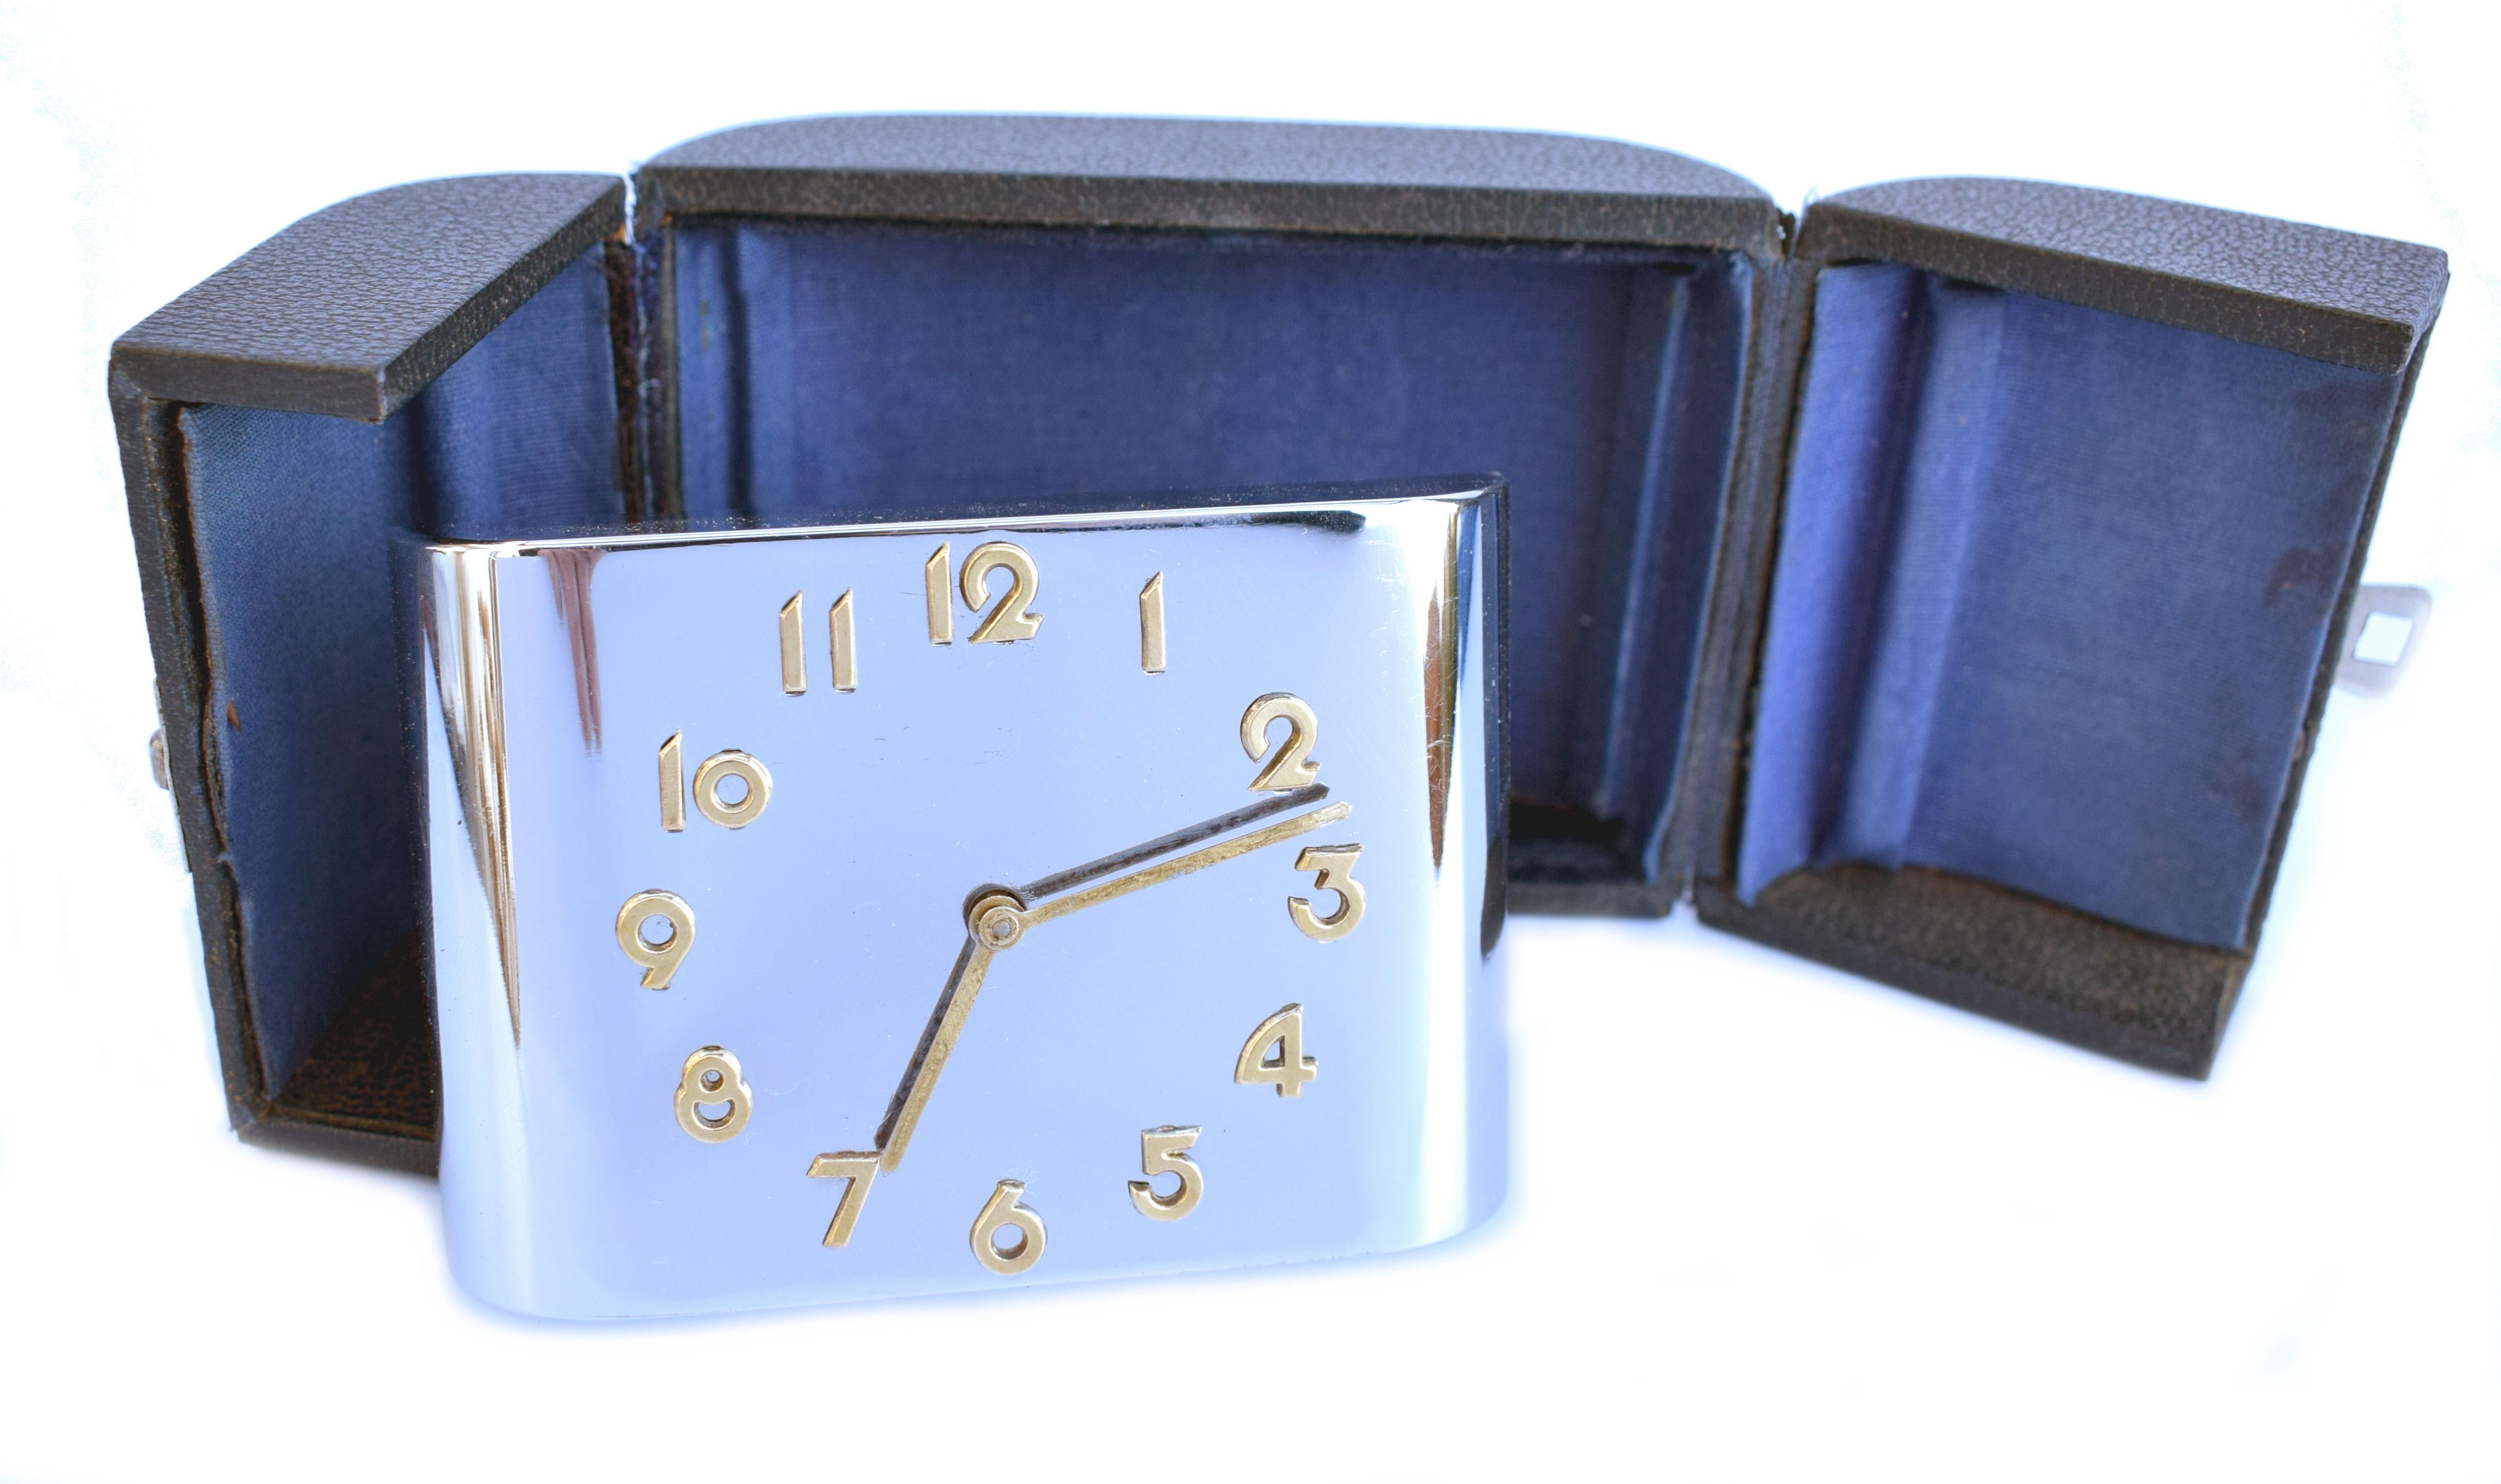 Offered for your consideration is this high end, extremely good quality Art Deco German Alarm travel clock. A superb movement is house inside the case and is in excellent working condition, the alarm working as well having been recently and